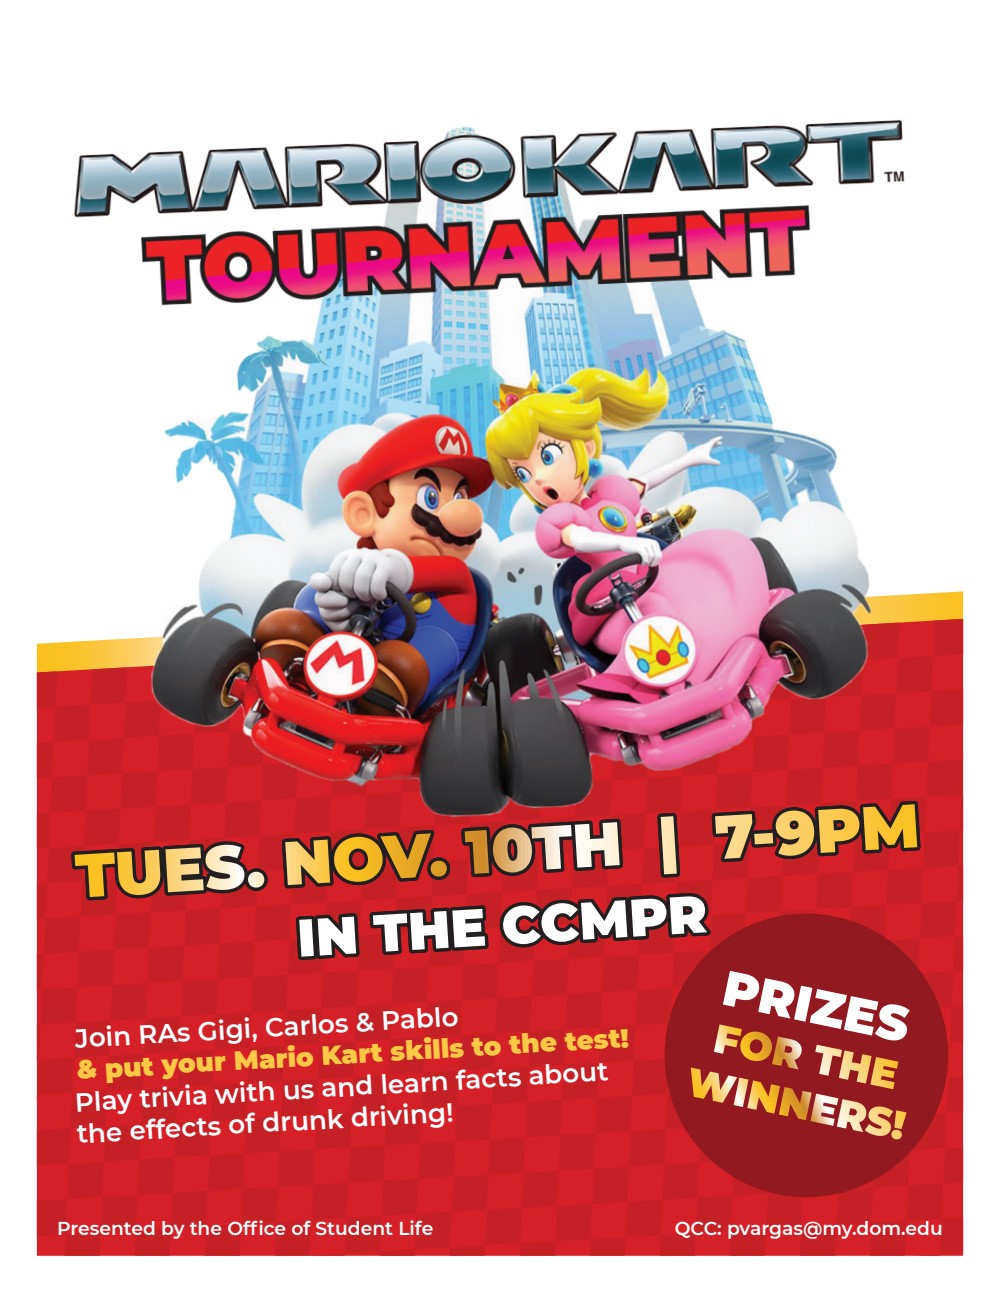 Come out and show your skills tonight at our Mario Kart Tournament